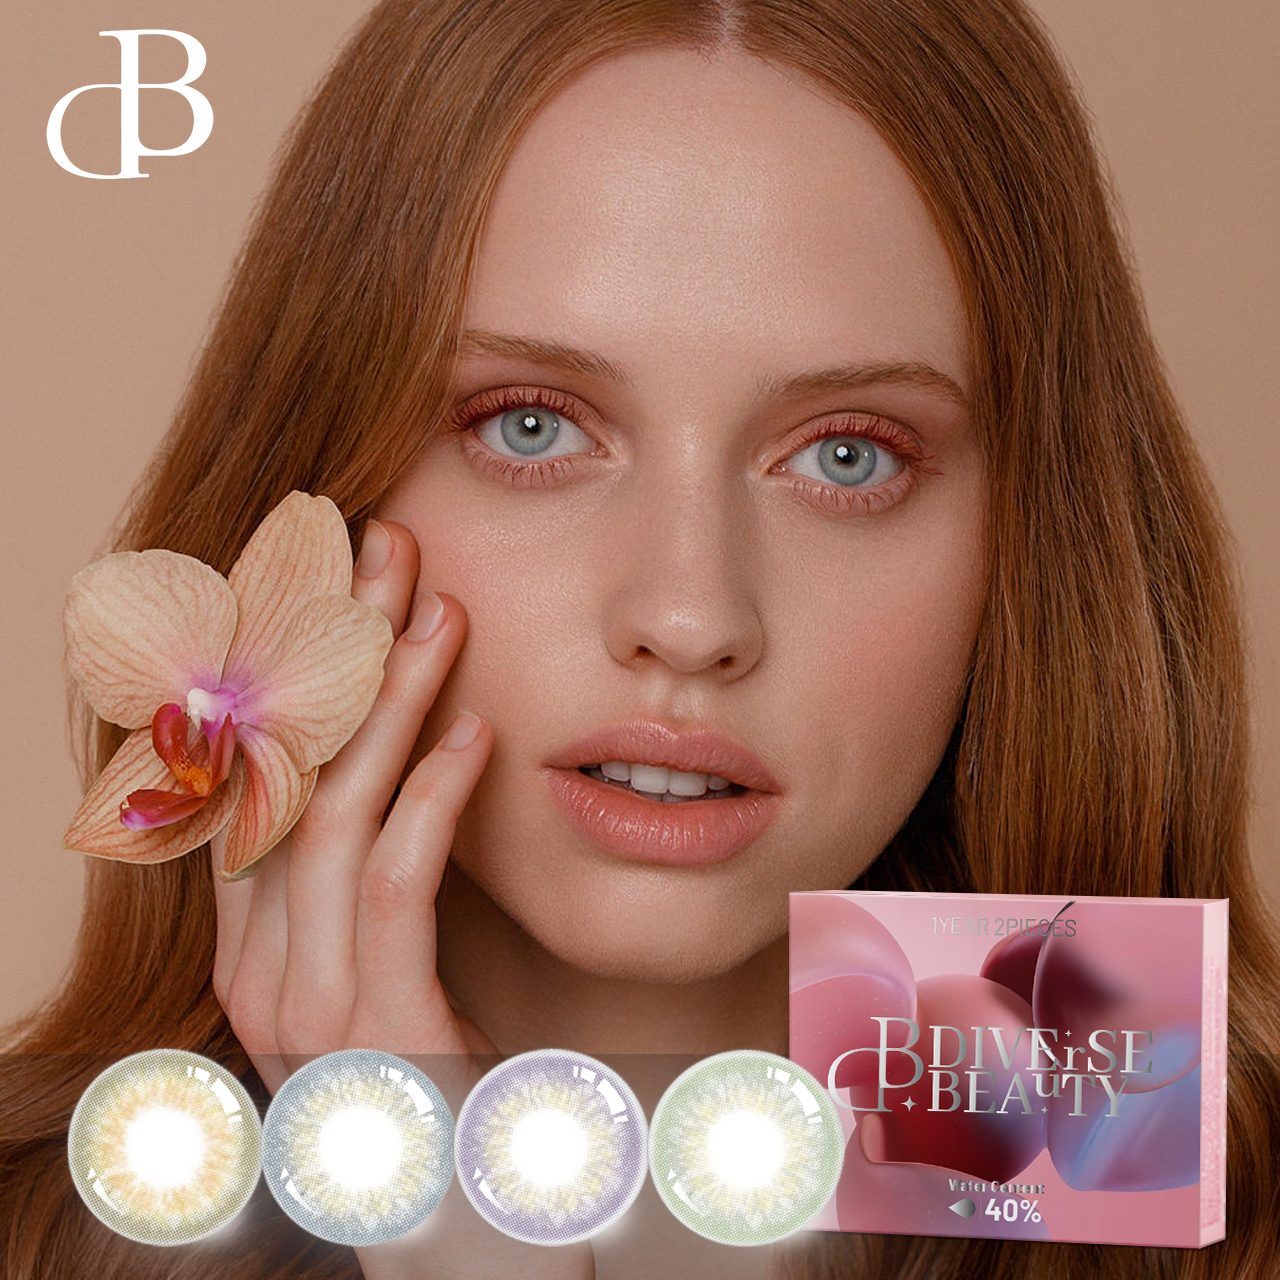 dbeyes fancylook colored contact lenses cosmetic